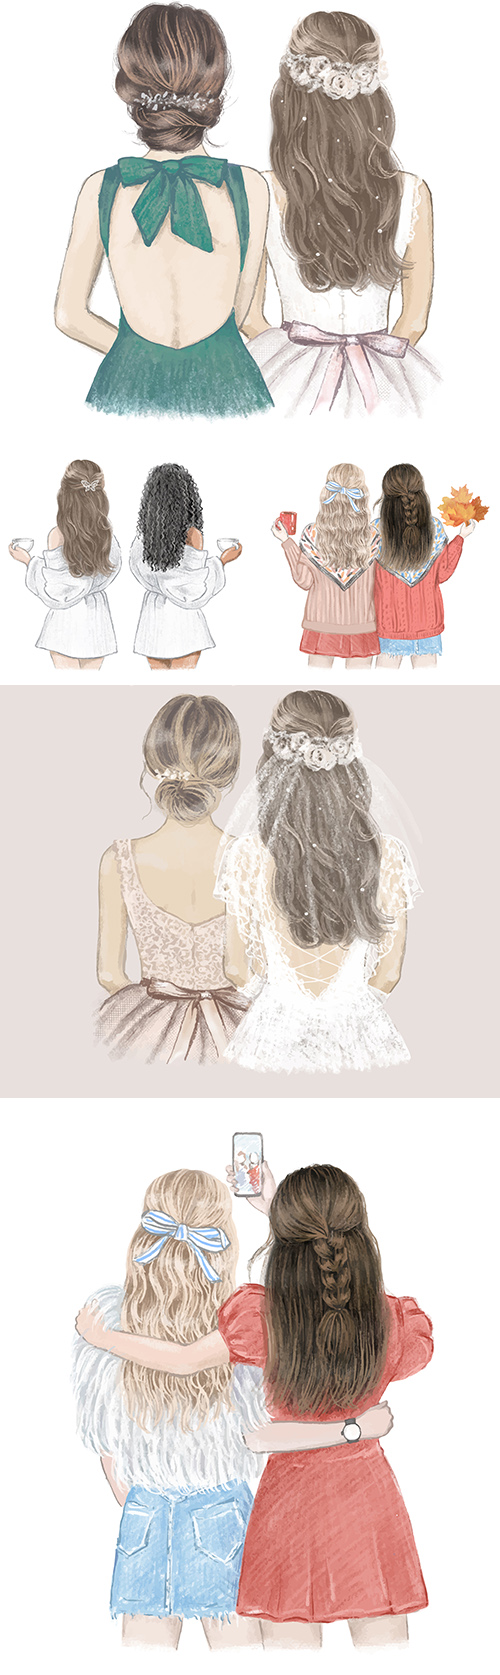 Girls with a beautiful hairstyle turned back illustration
